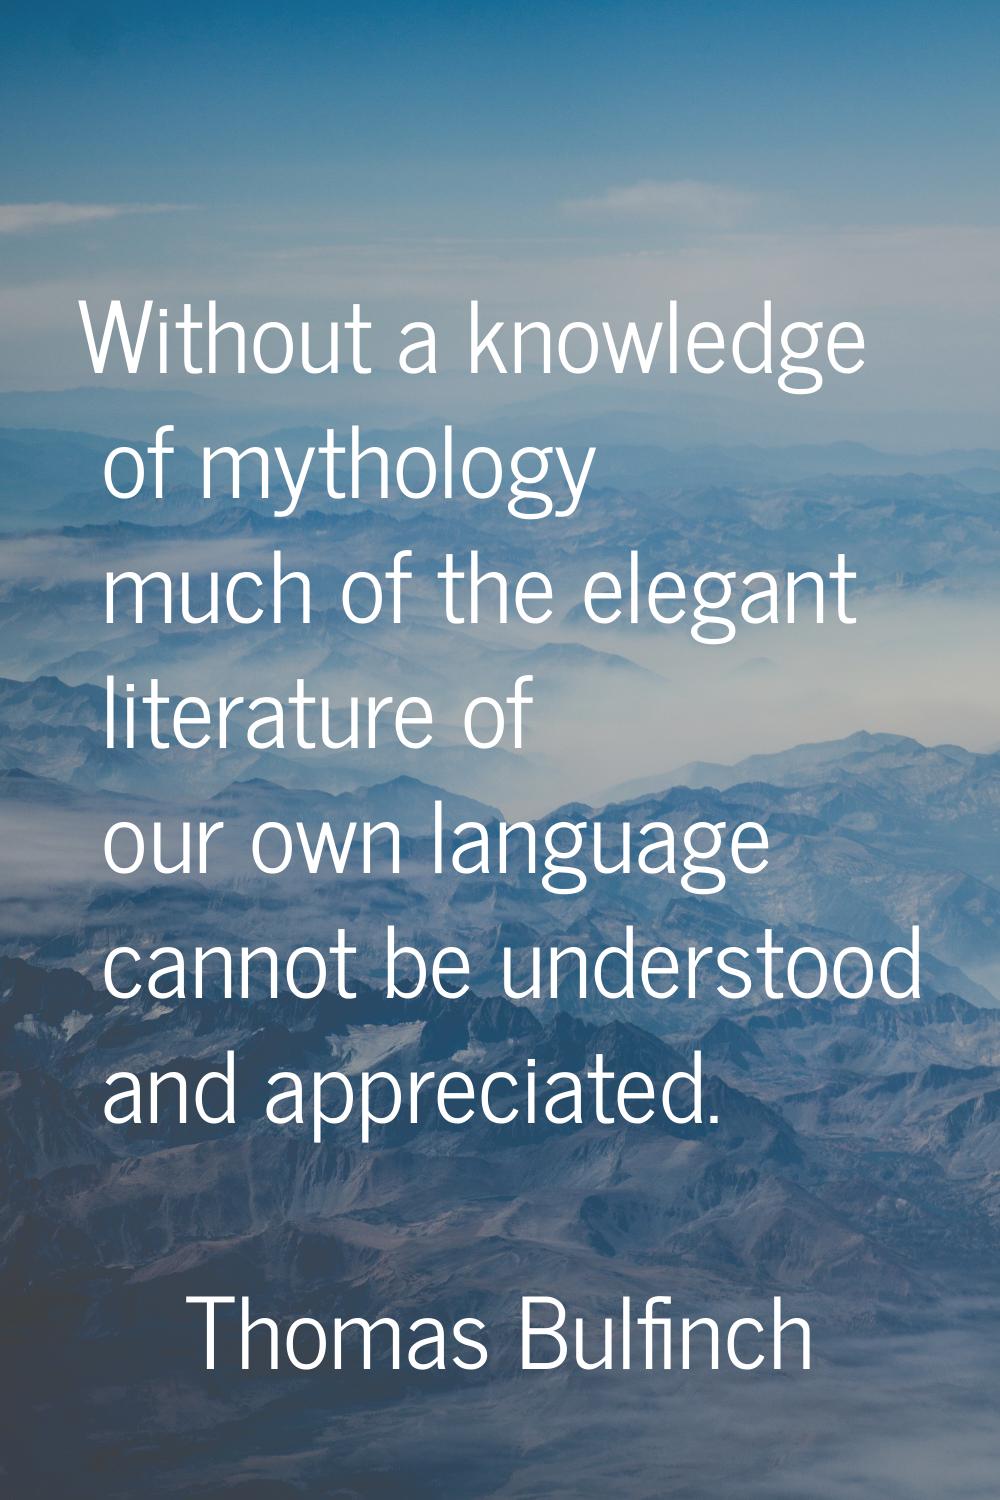 Without a knowledge of mythology much of the elegant literature of our own language cannot be under